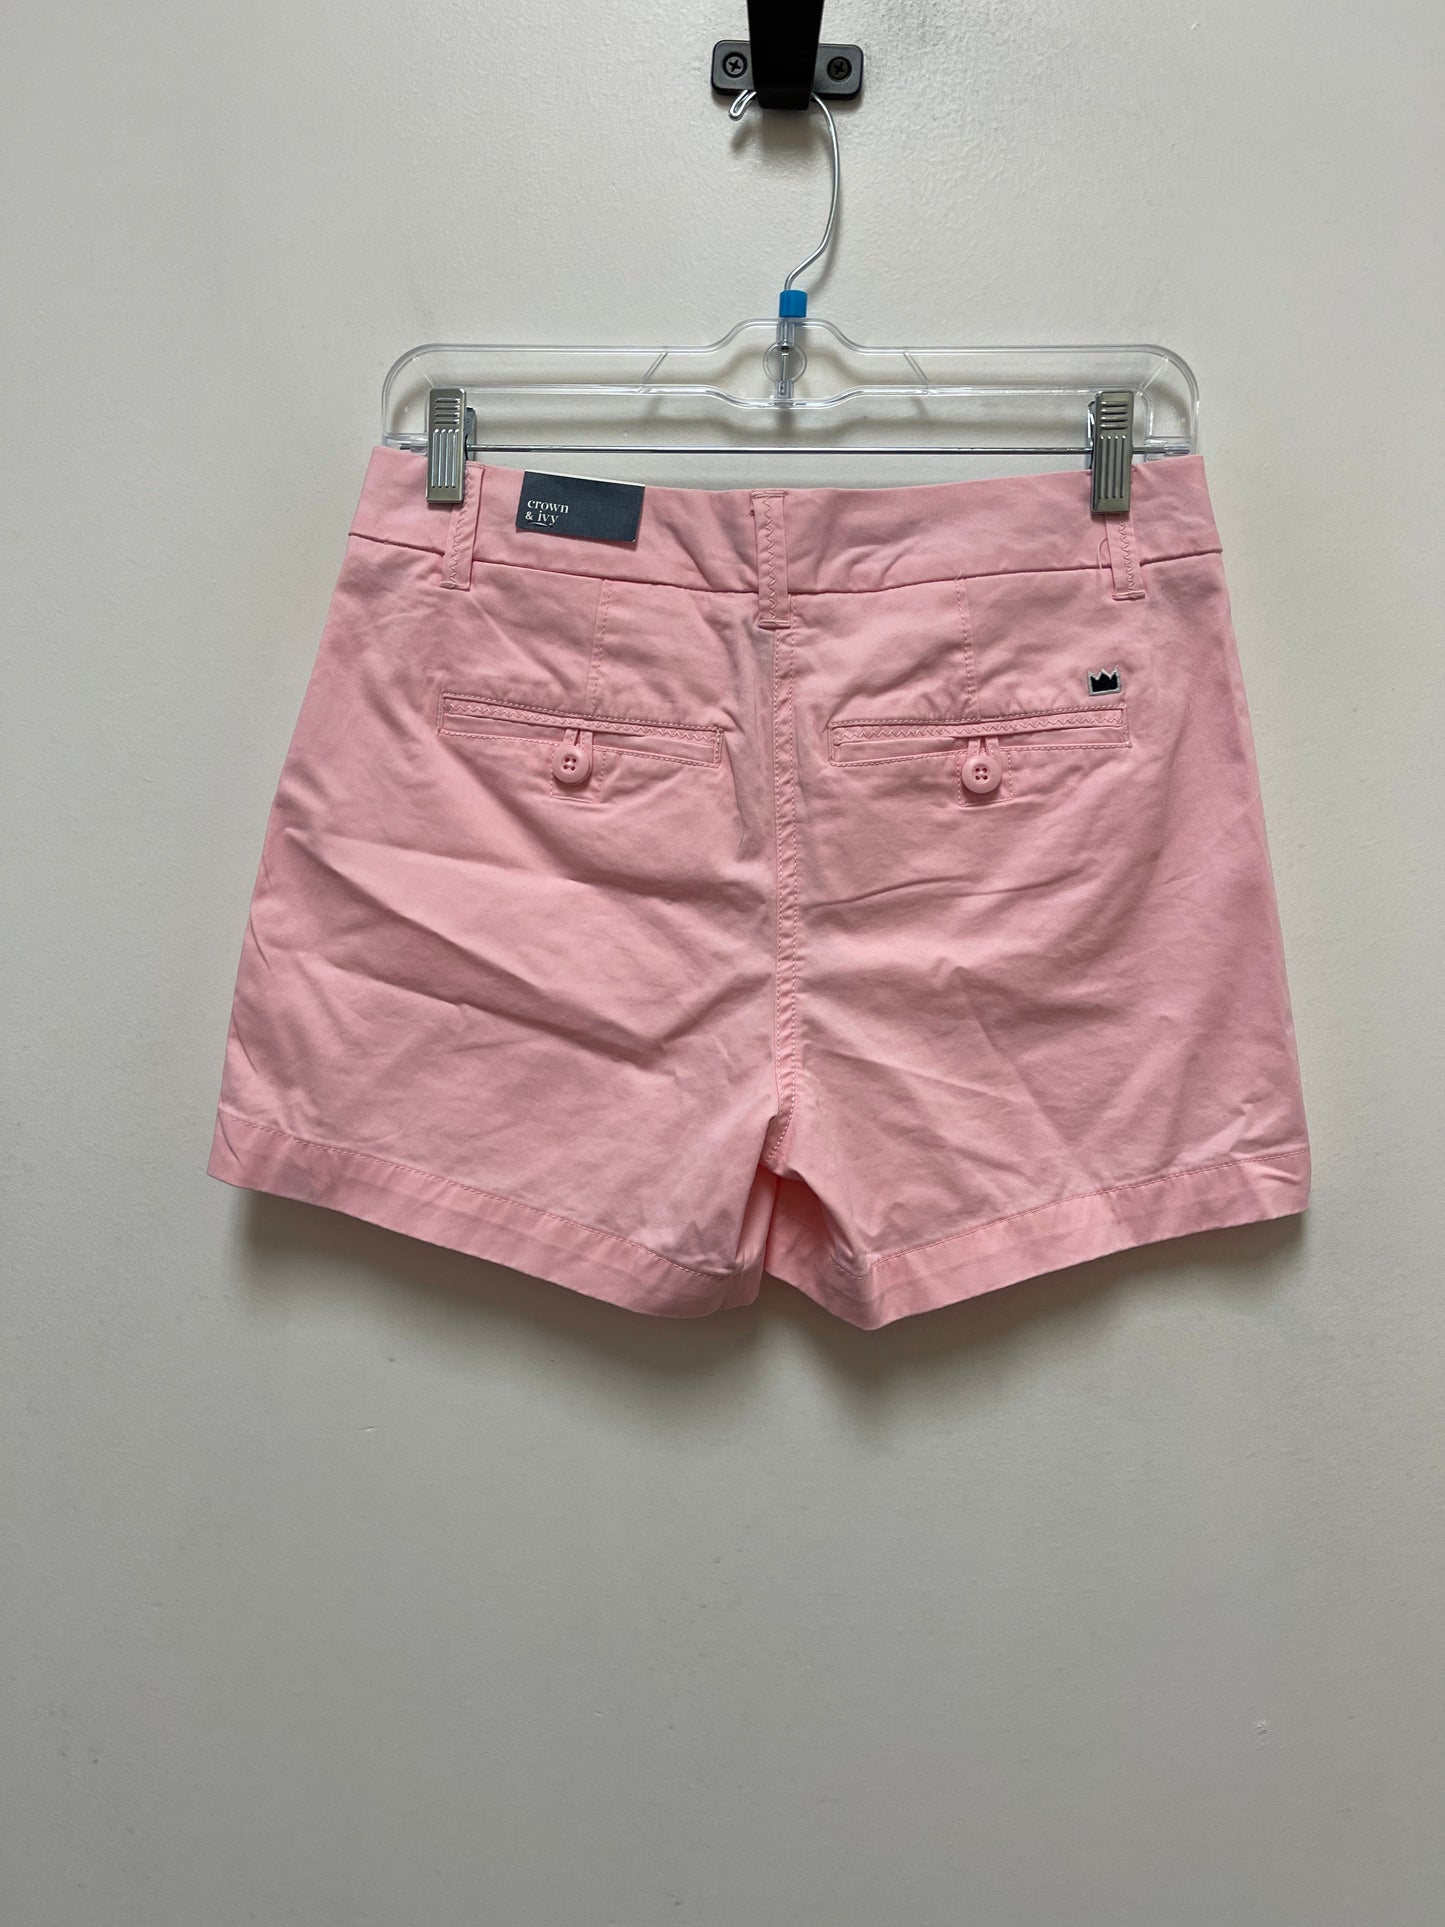 Shorts By Crown And Ivy  Size: 2petite